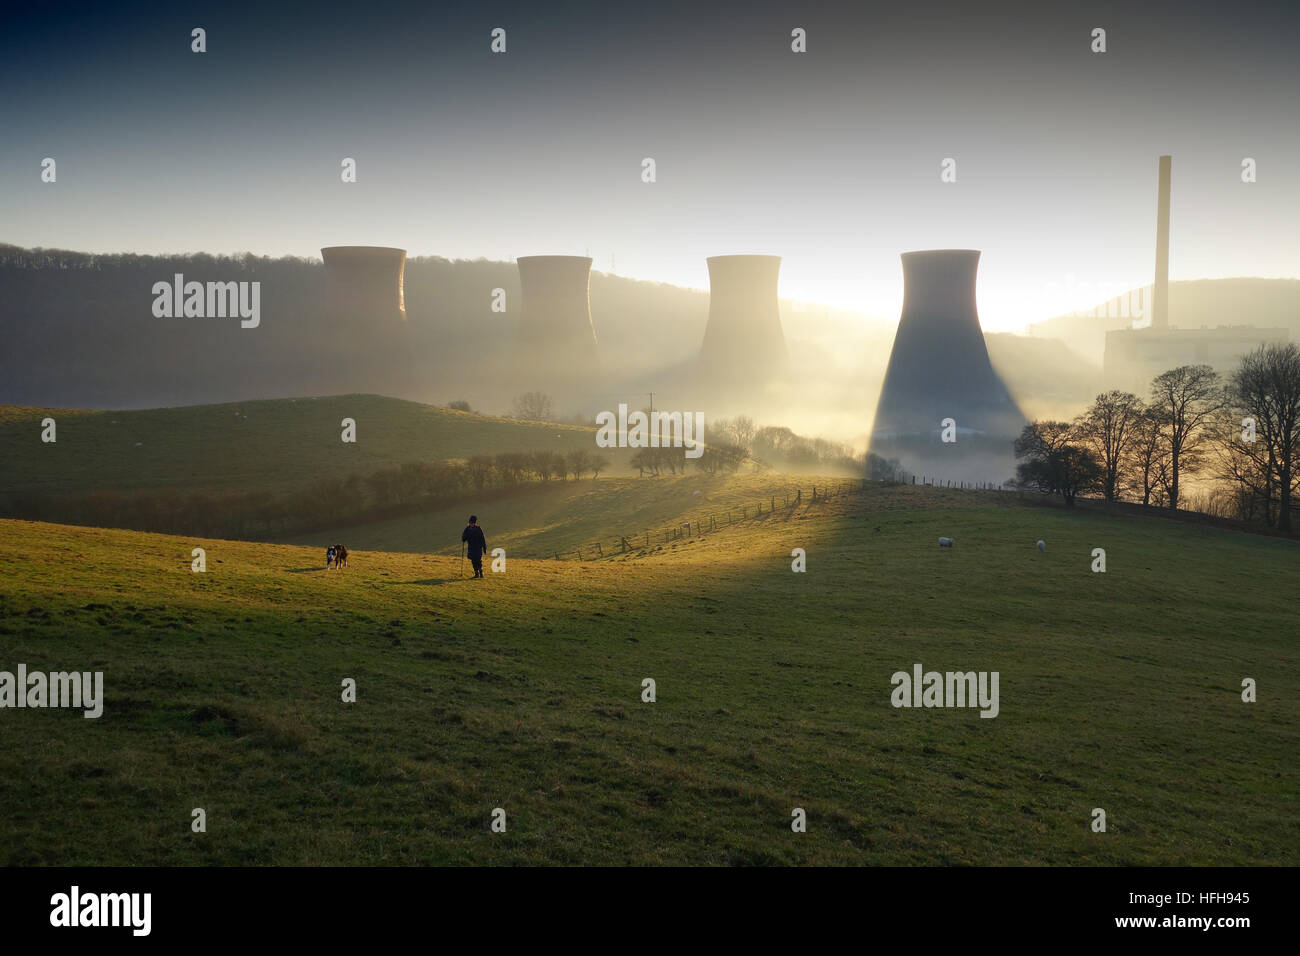 After a rainy New Years Day the sun finally appears between the cooling towers of Ironbridge Power Station in the late afternoon. Credit: David Bagnall/Alamy Live News Stock Photo